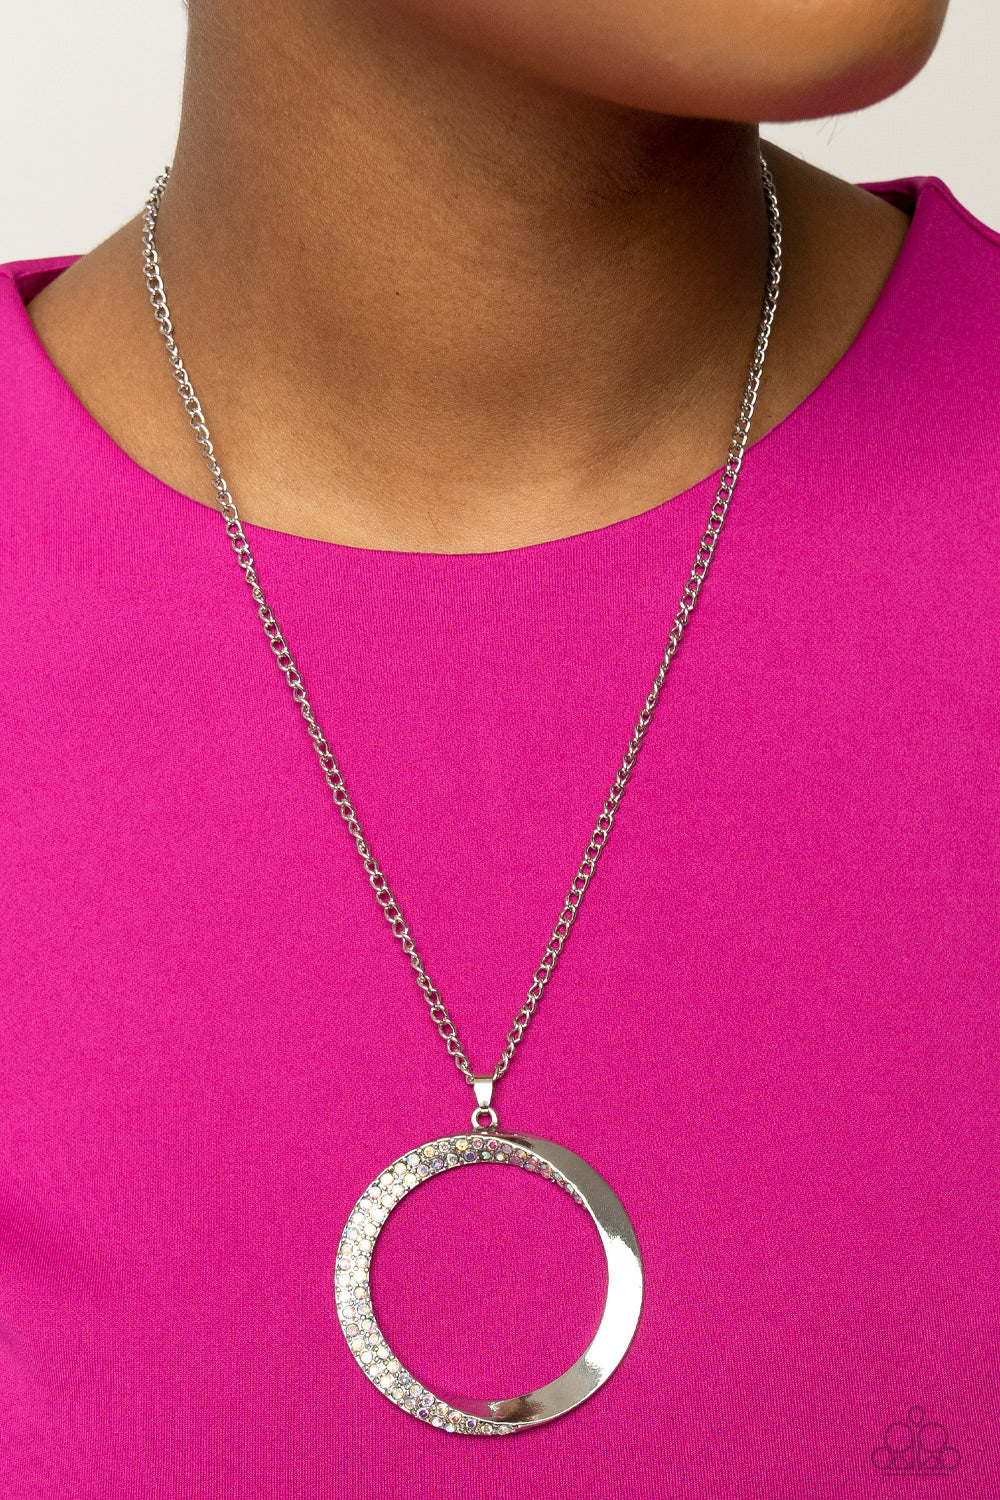 Paparazzi Accessories Encrusted Elegance - Multi An airy, oversized, warped, shiny silver hoop dangles down the chest from a classic silver chain. Two rows of dainty iridescent rhinestones encrust along the inner curve of the hoop for an understated, eleg